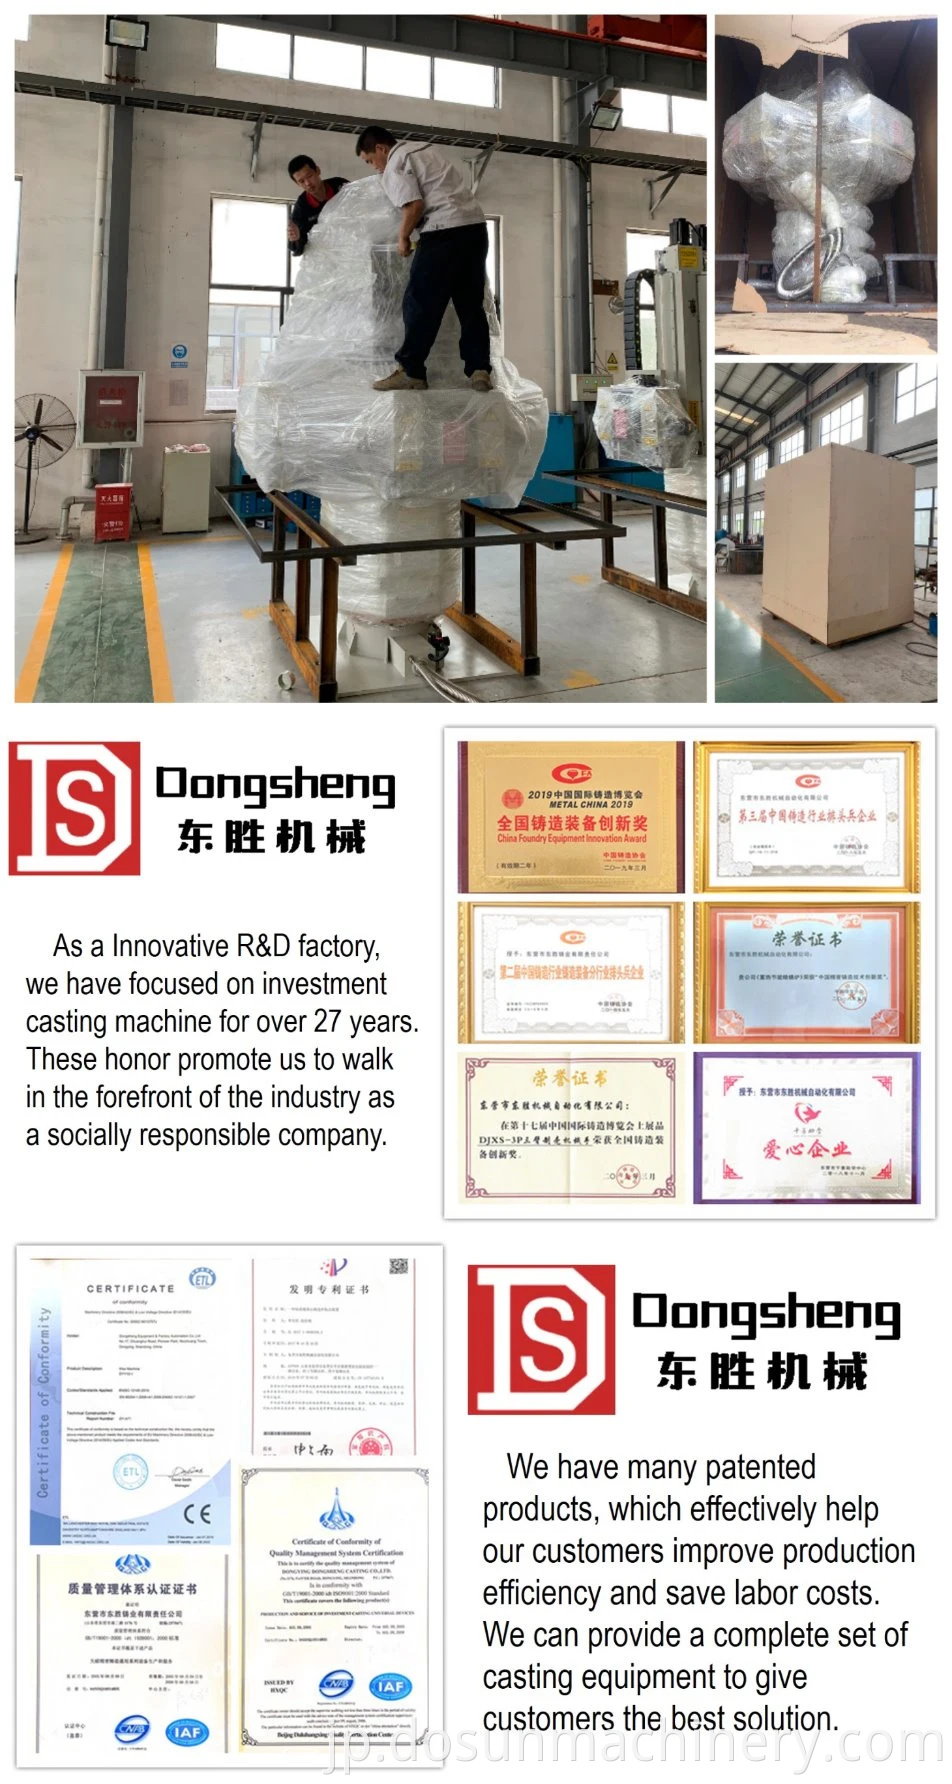 ISO9001を備えたDongsheng Special Use Casting Factory